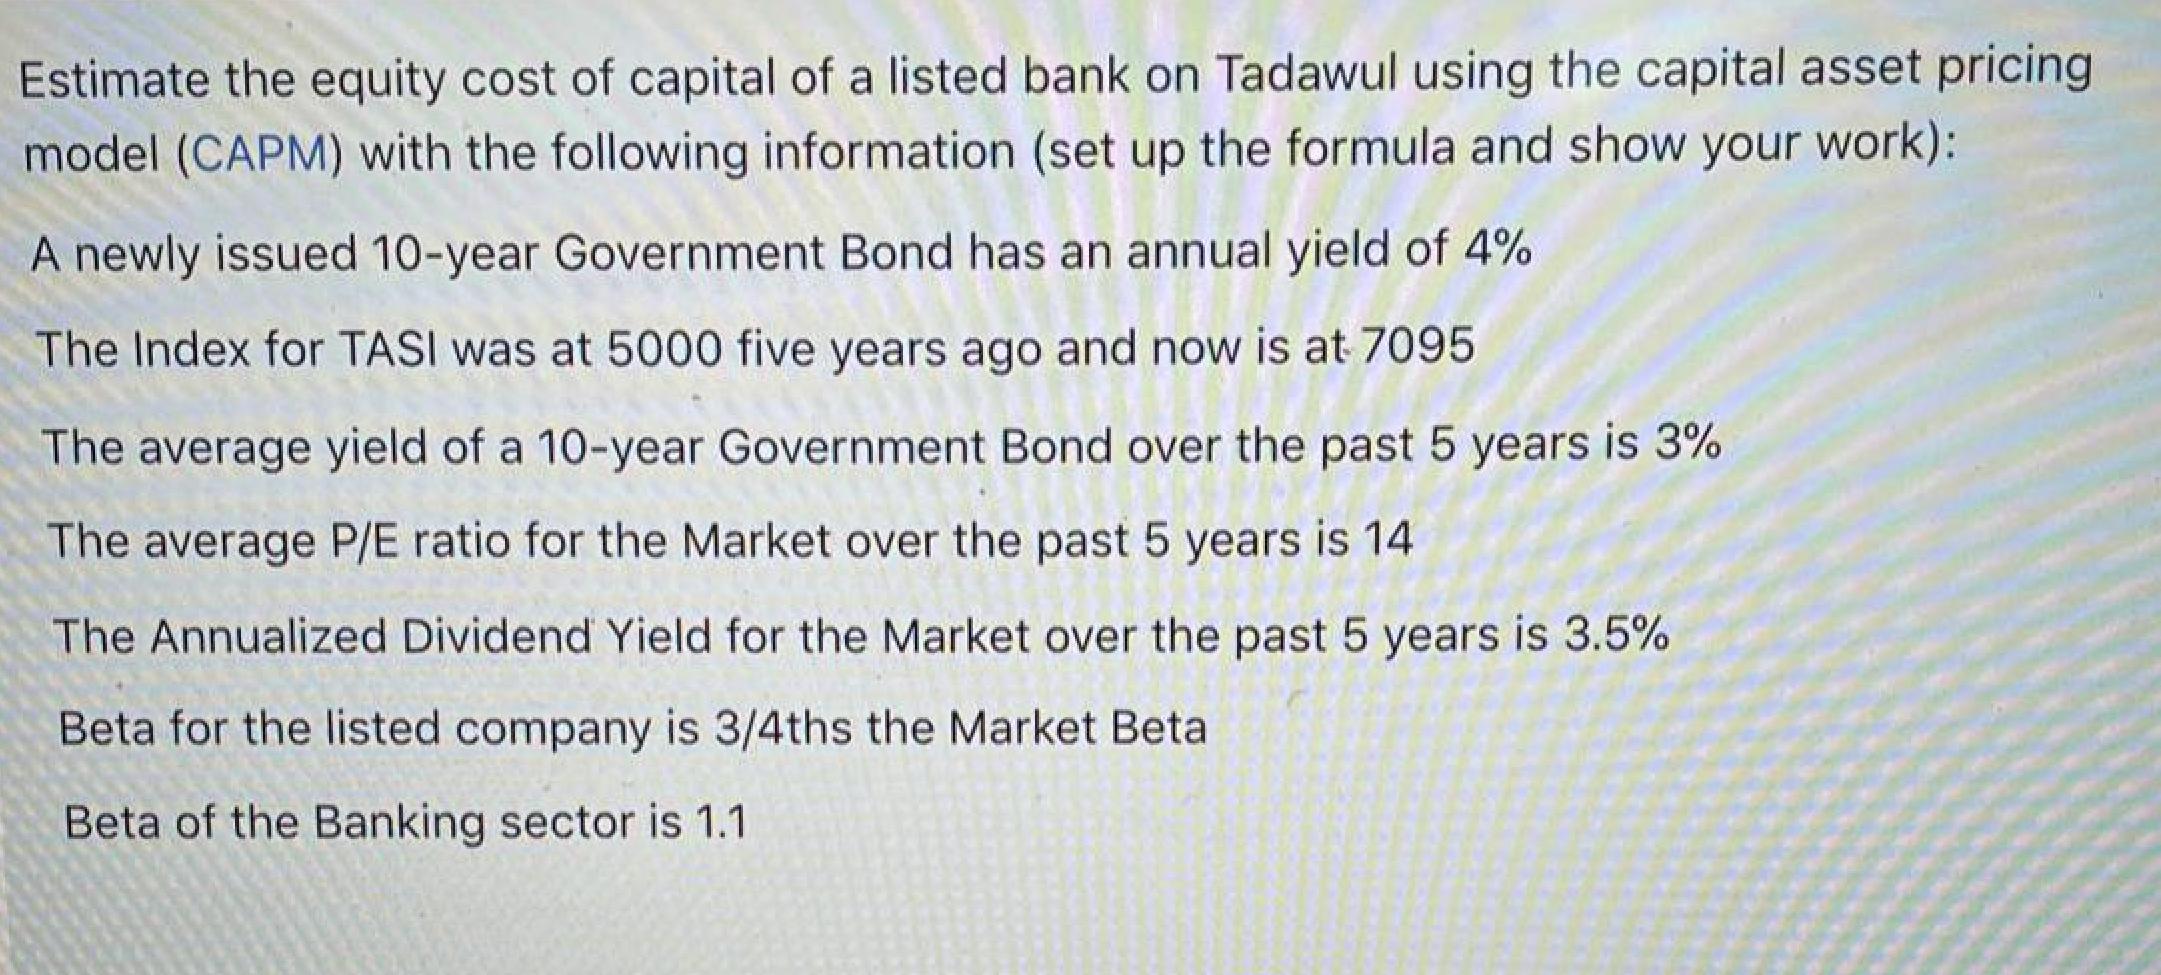 Estimate the equity cost of capital of a listed bank on Tadawul using the capital asset pricing model (CAPM) with the followi